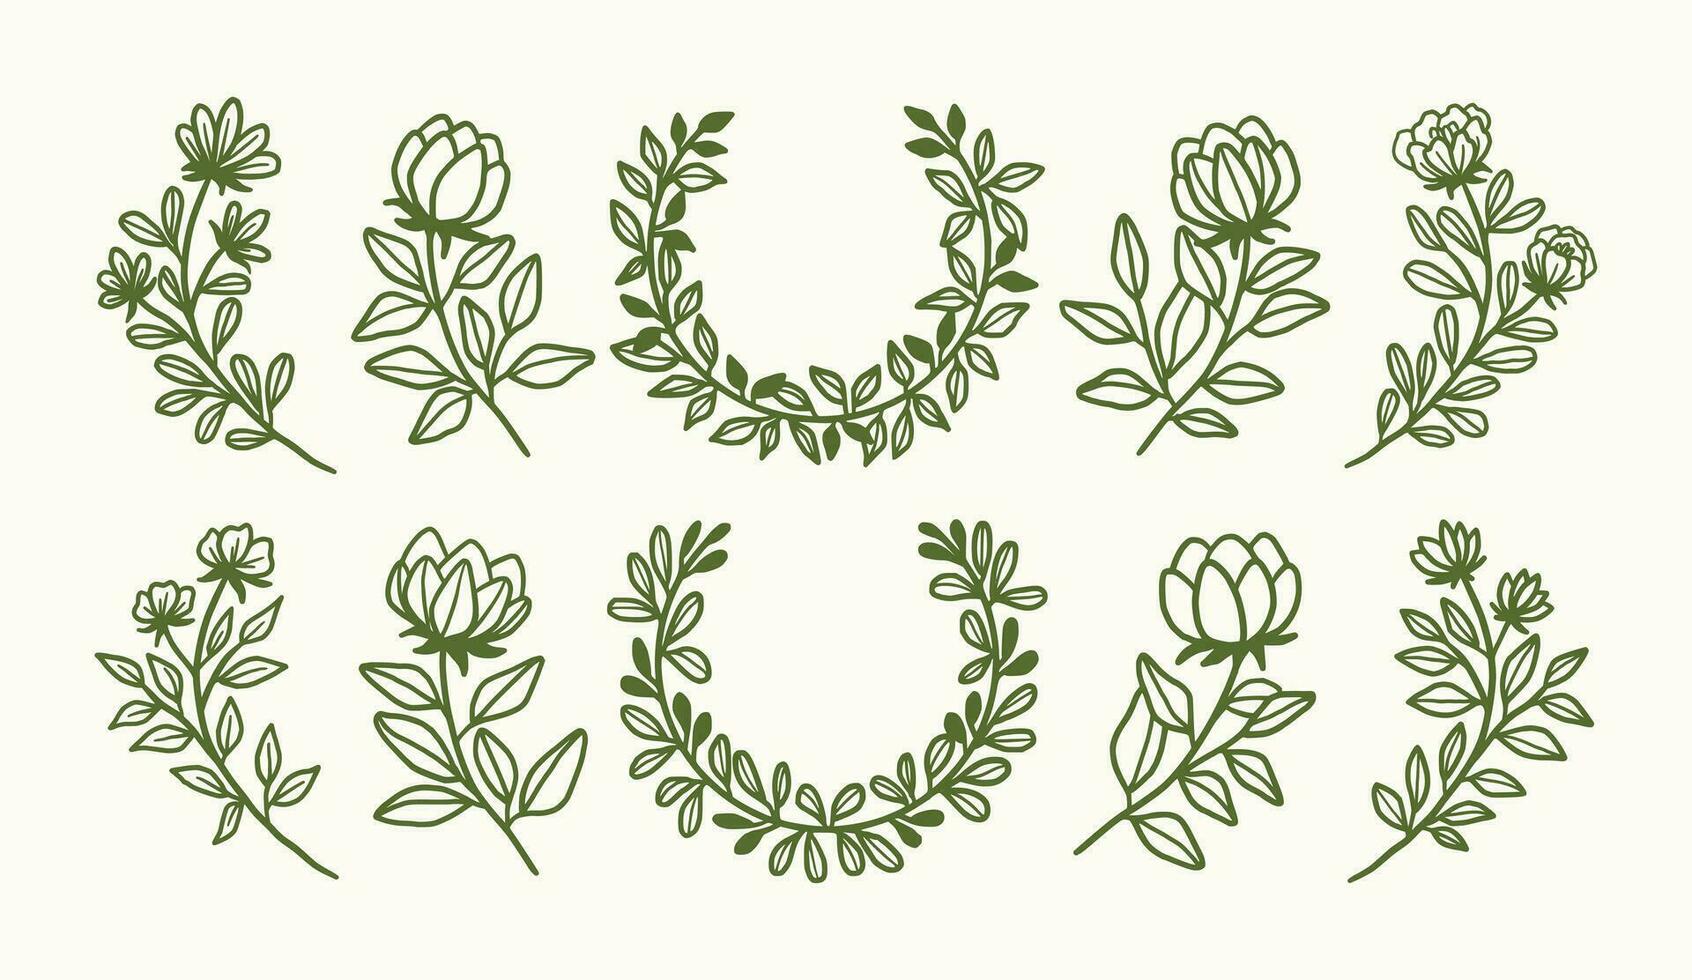 Vintage hand drawn flower wreath and logo element collection vector